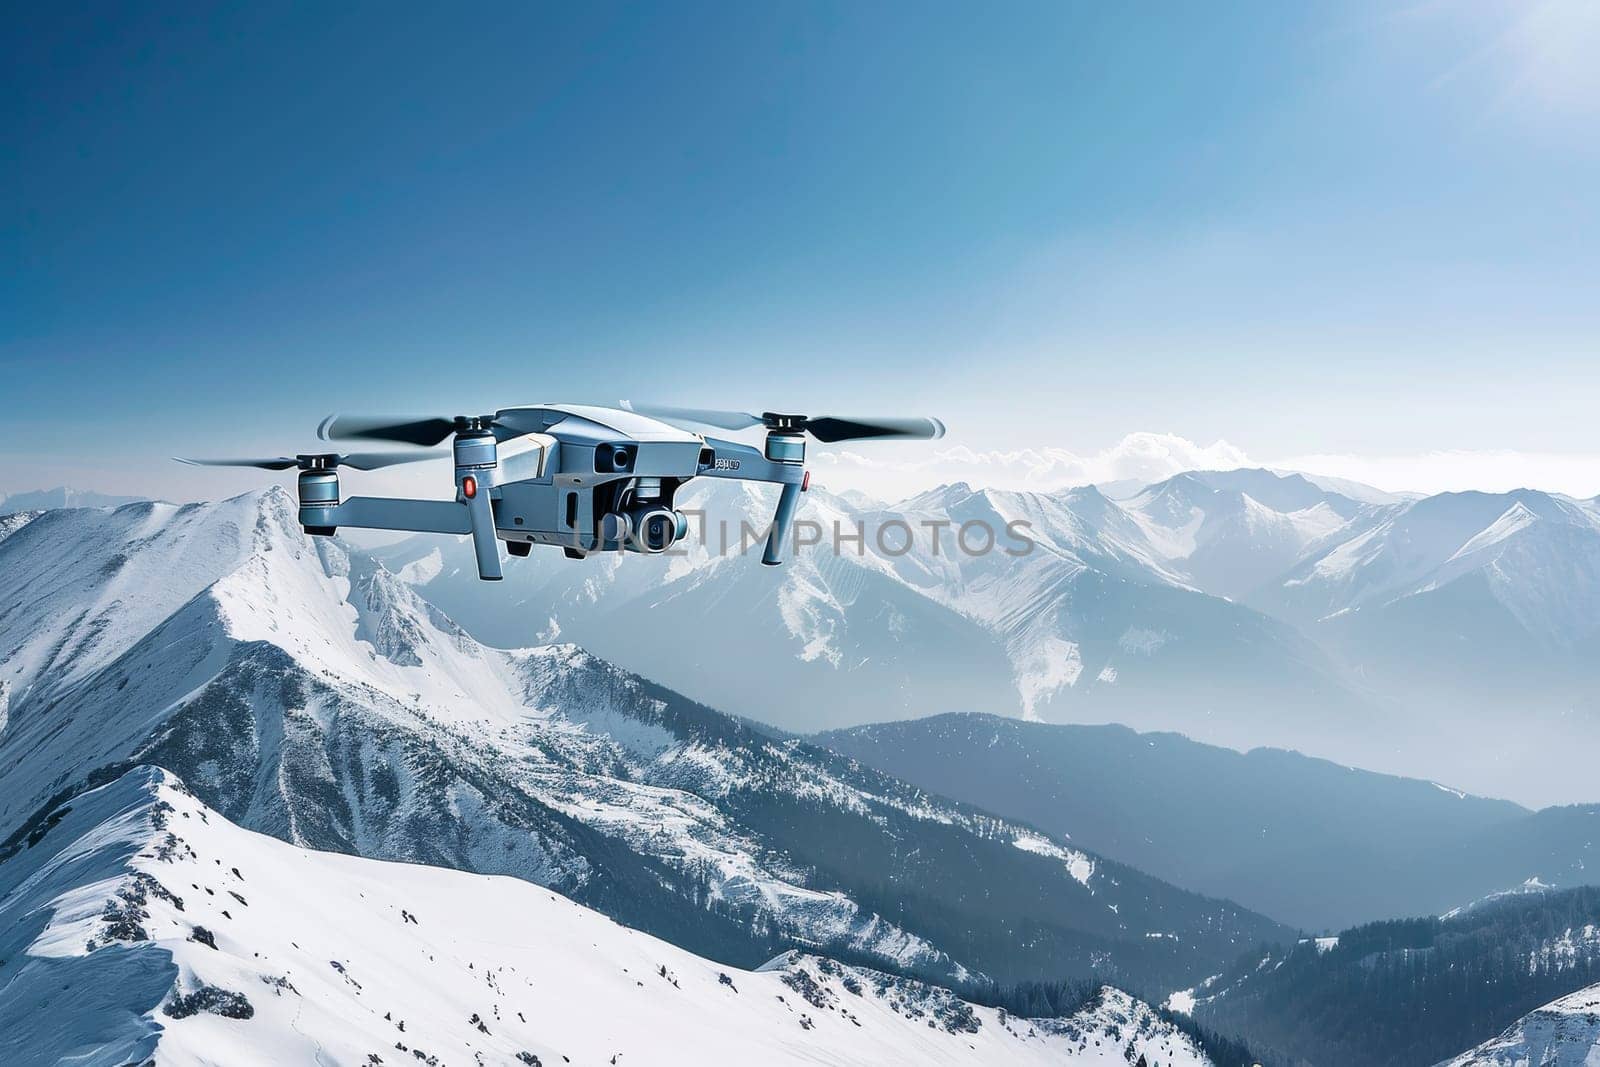 A drone is flying over a snowy mountain range. The sky is cloudy and the sun is setting, creating a serene and peaceful atmosphere